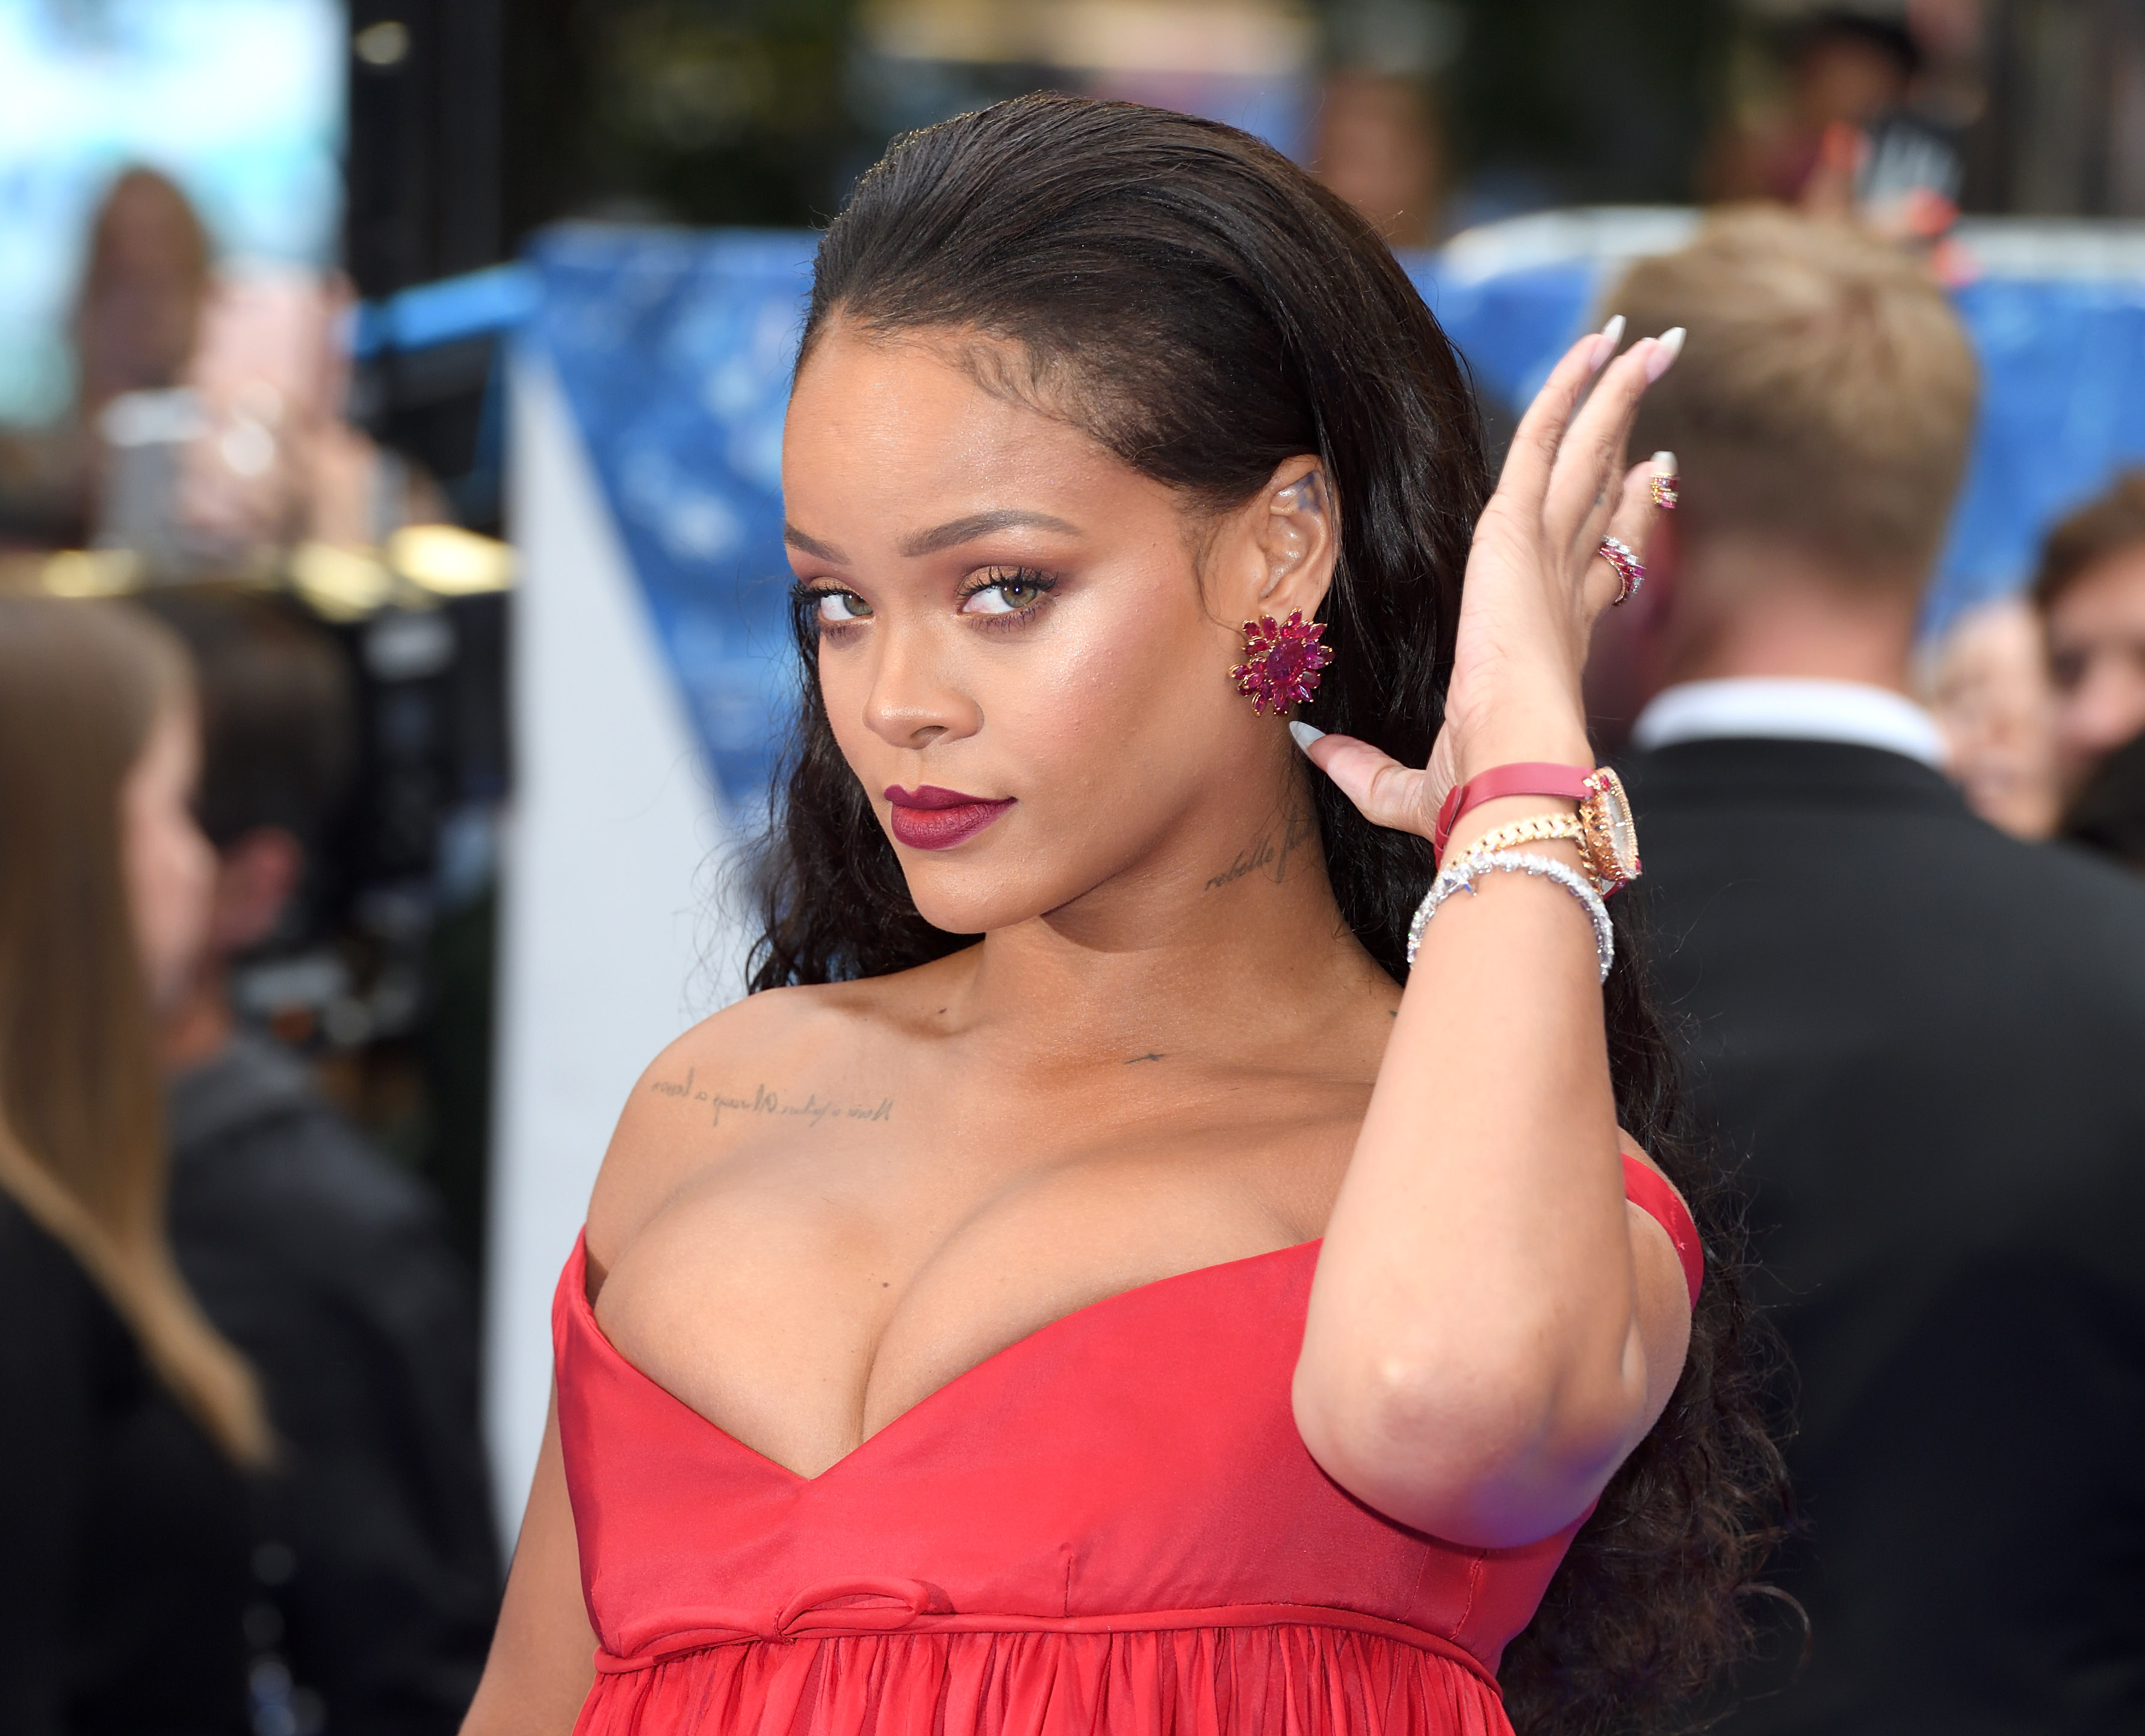 LONDON, ENGLAND - JULY 24:  Rihanna attends the "Valerian And The City Of A Thousand Planets" European Premiere at Cineworld Leicester Square on July 24, 2017 in London, England.  (Photo by Karwai Tang/WireImage) (Karwai Tang&mdash;WireImage)